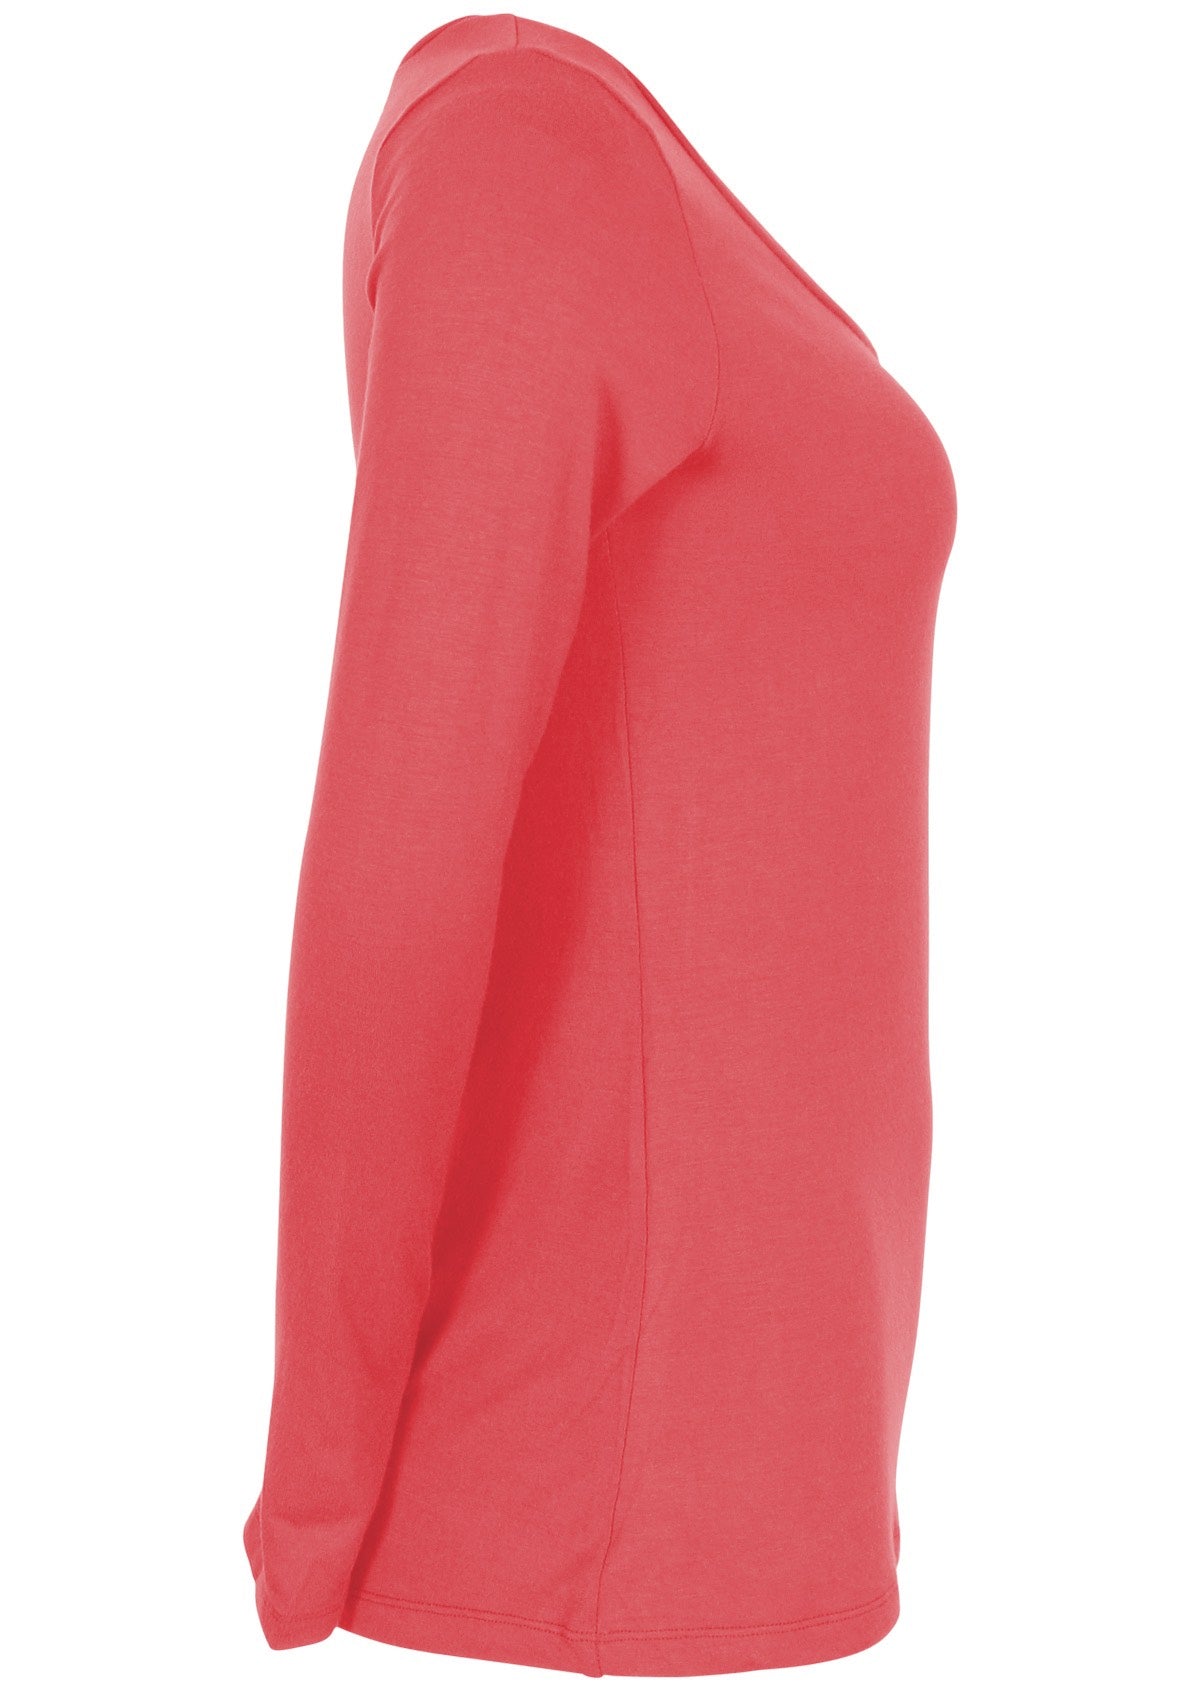 Side view of women's rose pink long sleeve stretch v-neck soft rayon top.